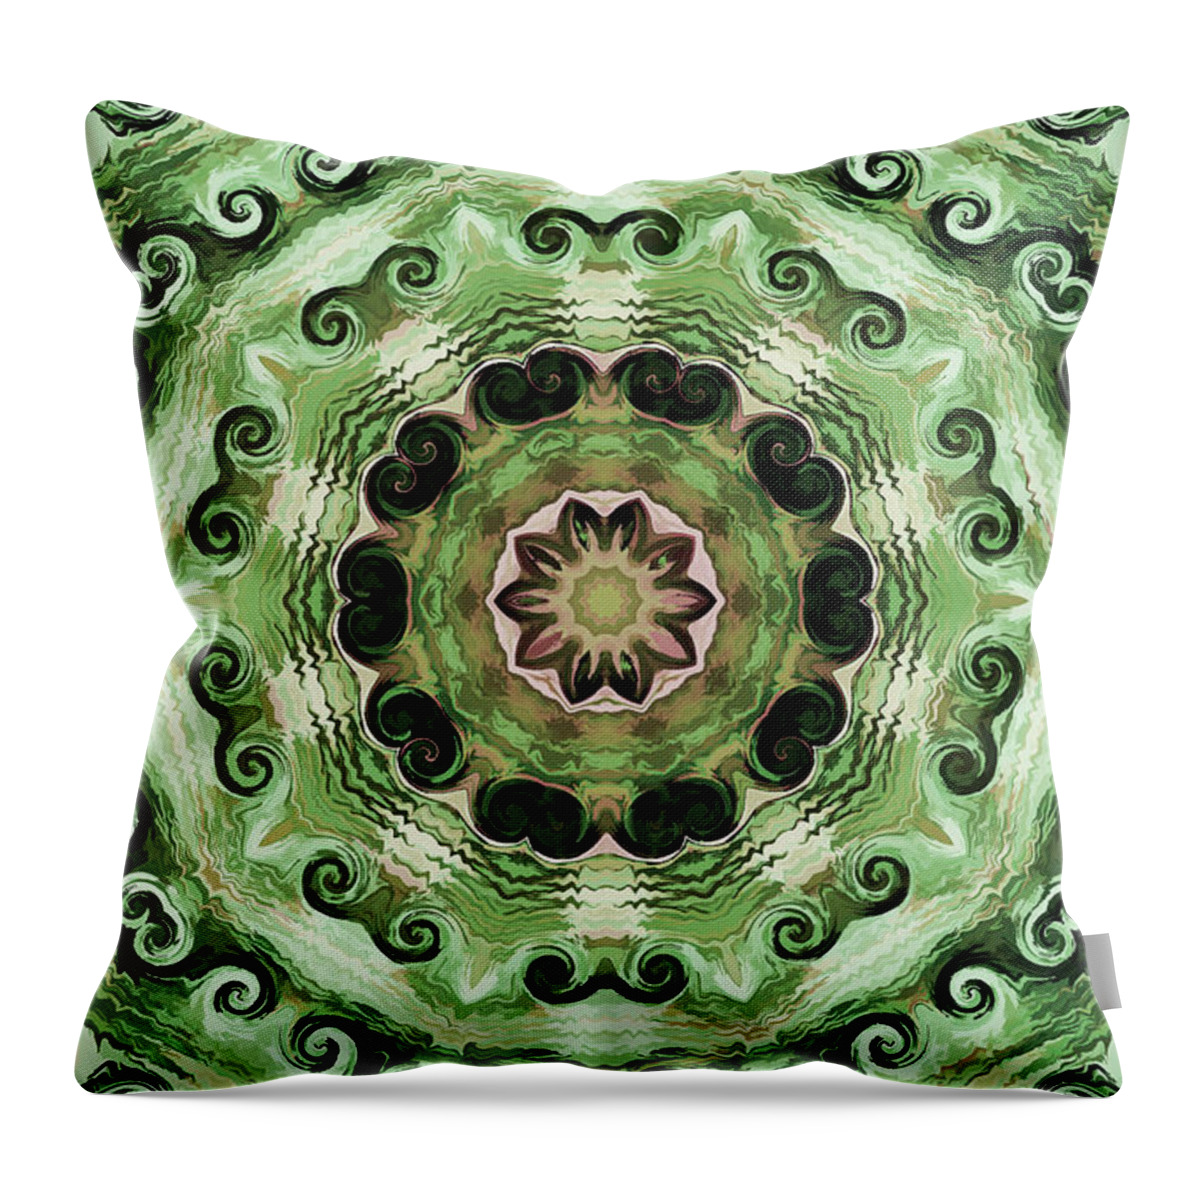 Mandala Art Throw Pillow featuring the painting Landscape by Jeelan Clark